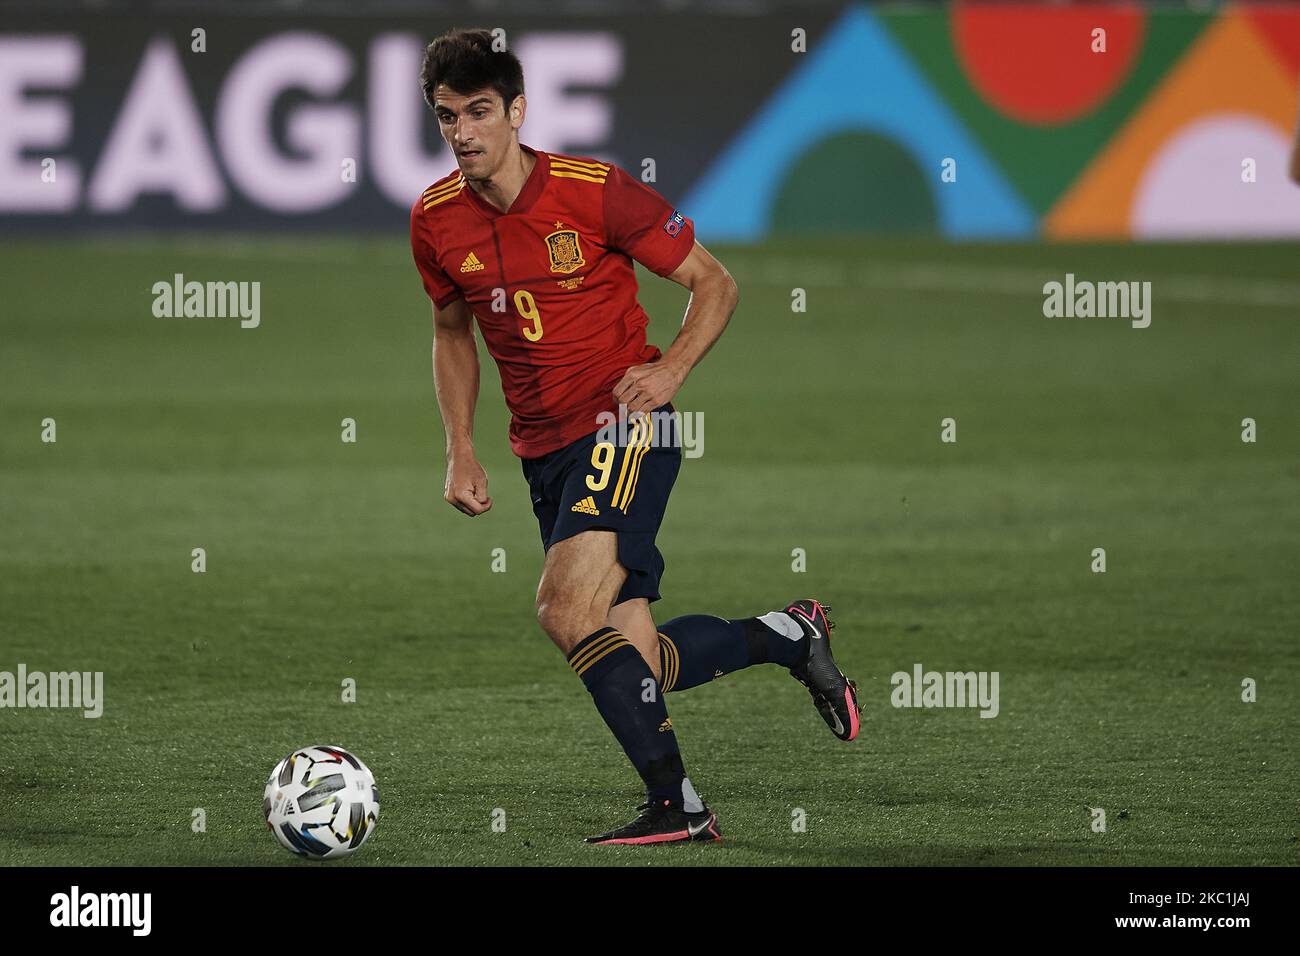 Gerard Moreno (Villarreal CF) of Spain runs with the ball during the UEFA Nations League group stage match between Spain and Switzerland at Estadio Alfredo Di Stefano on October 10, 2020 in Madrid, Spain. (Photo by Jose Breton/Pics Action/NurPhoto) Stock Photo